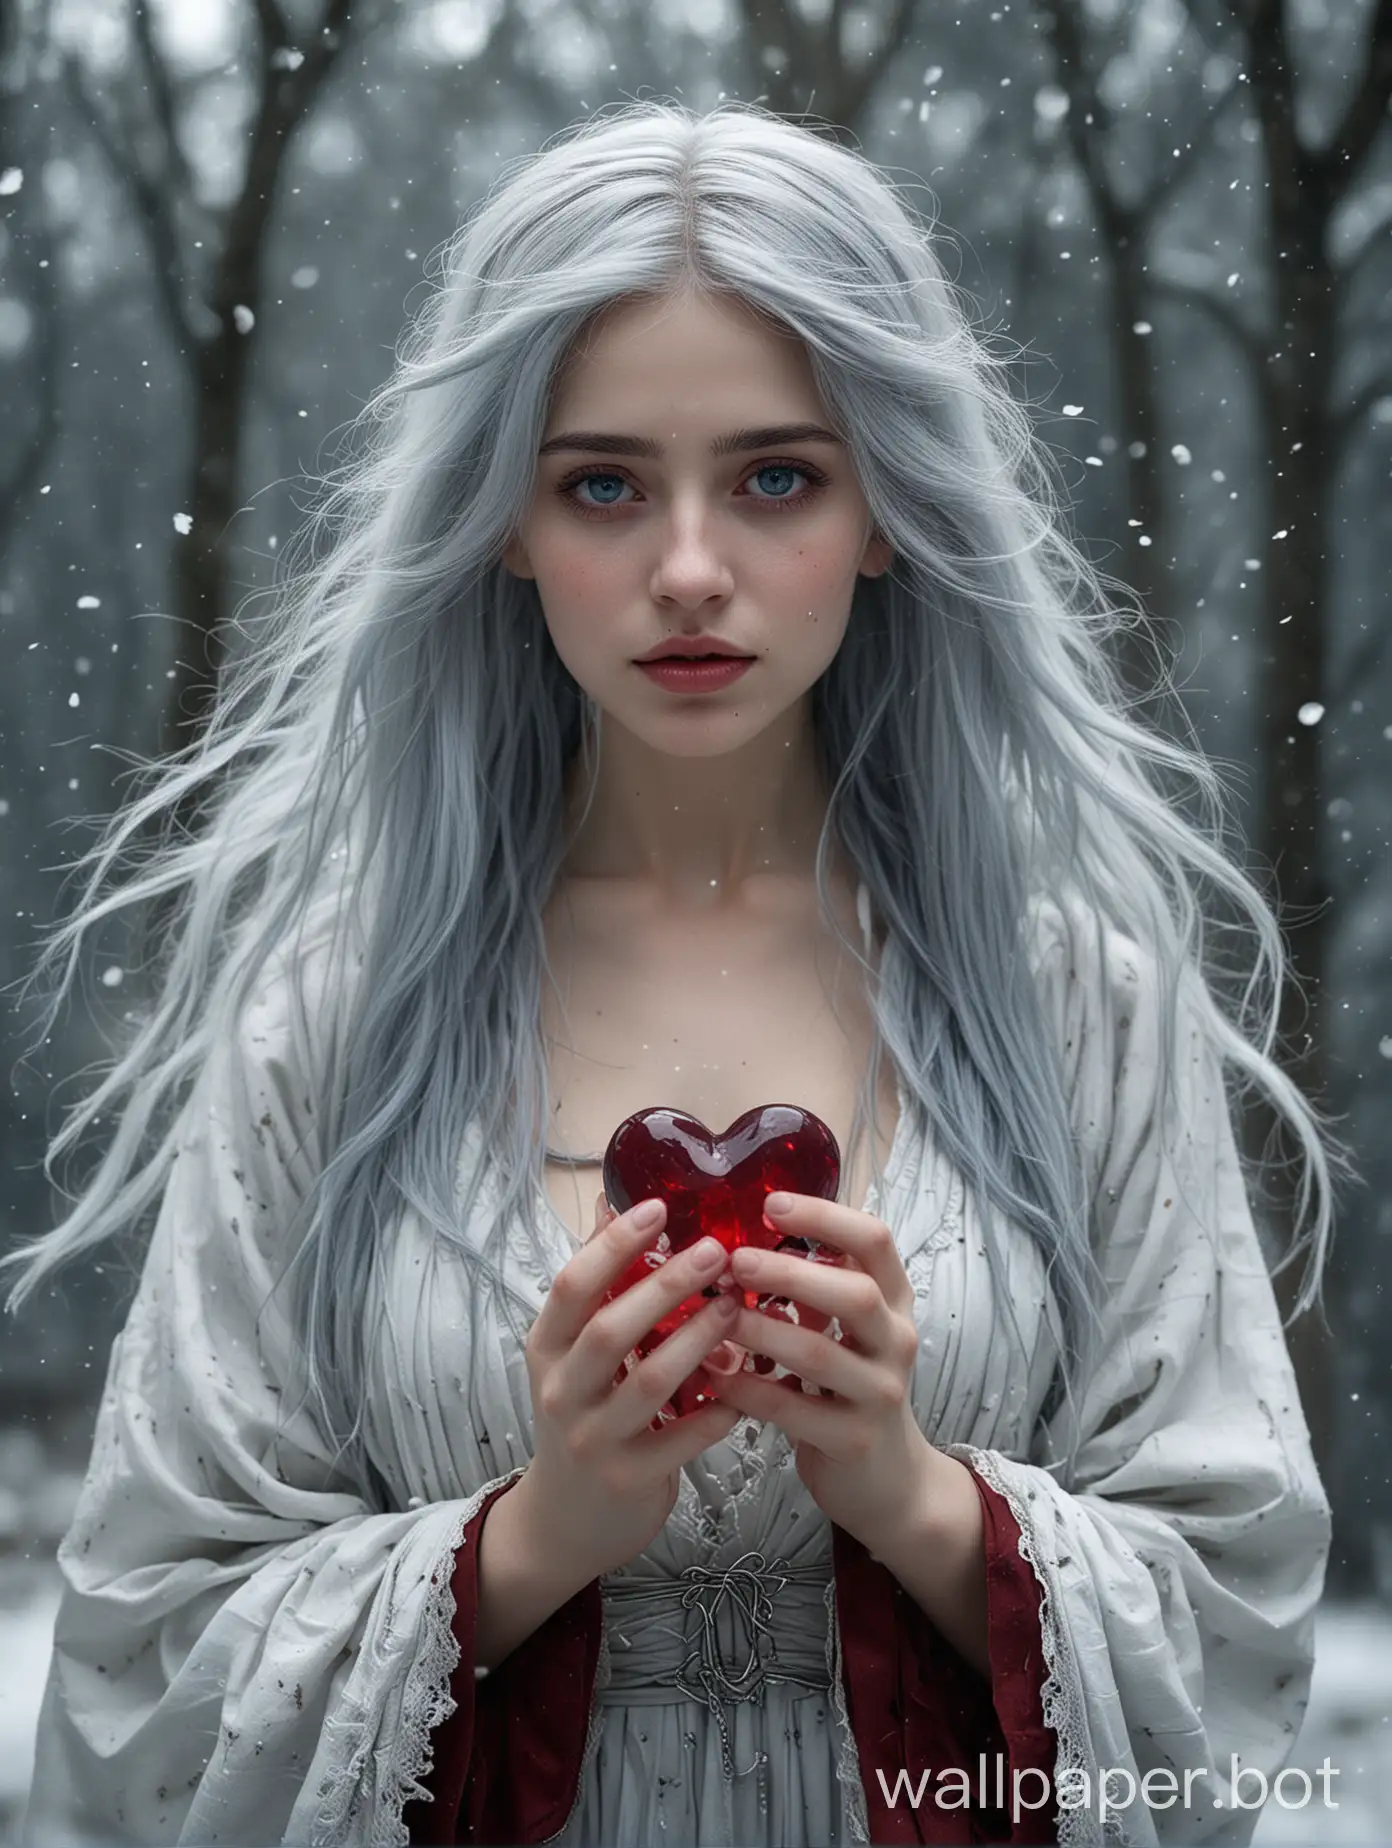 pictured is a mysterious girl of 19, whose long silvery-blue hair flows in the wind, creating an effective backdrop. Her grey eyes, strikingly deep, look directly at the viewer, captivating with their unfathomable depth. In her hand she holds a ruby heart, from which blood drips, creating a contrast with her pure, snow-white attire. Her clothing is light and airy, like a dress or light robe, accentuating her otherworldly appearance, as though she has come from another world. The cover may be bathed in the shadows of night, further enhancing the sense of mystery and magic.